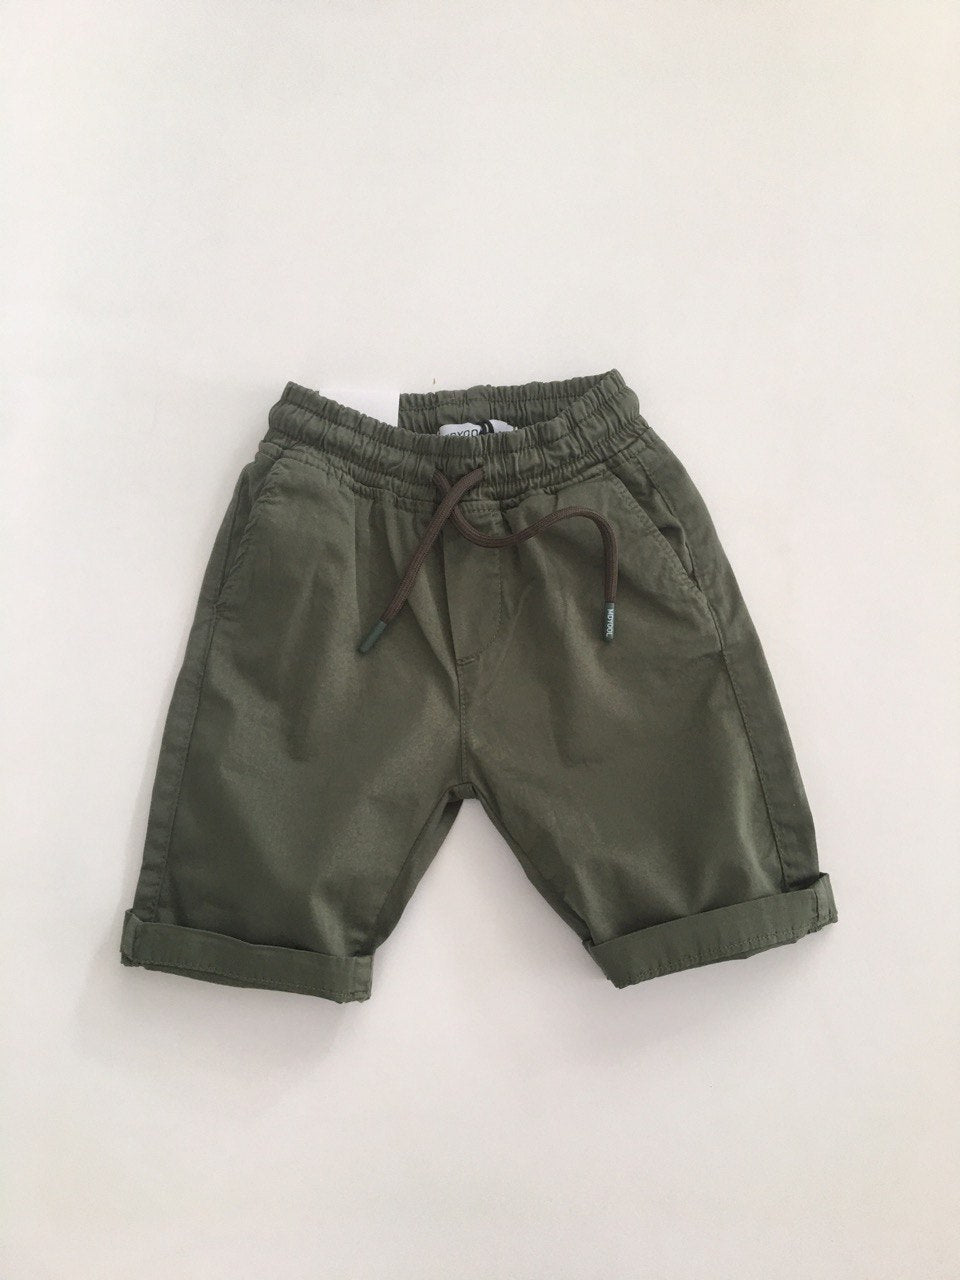 Green Chino Short form 2 to 8